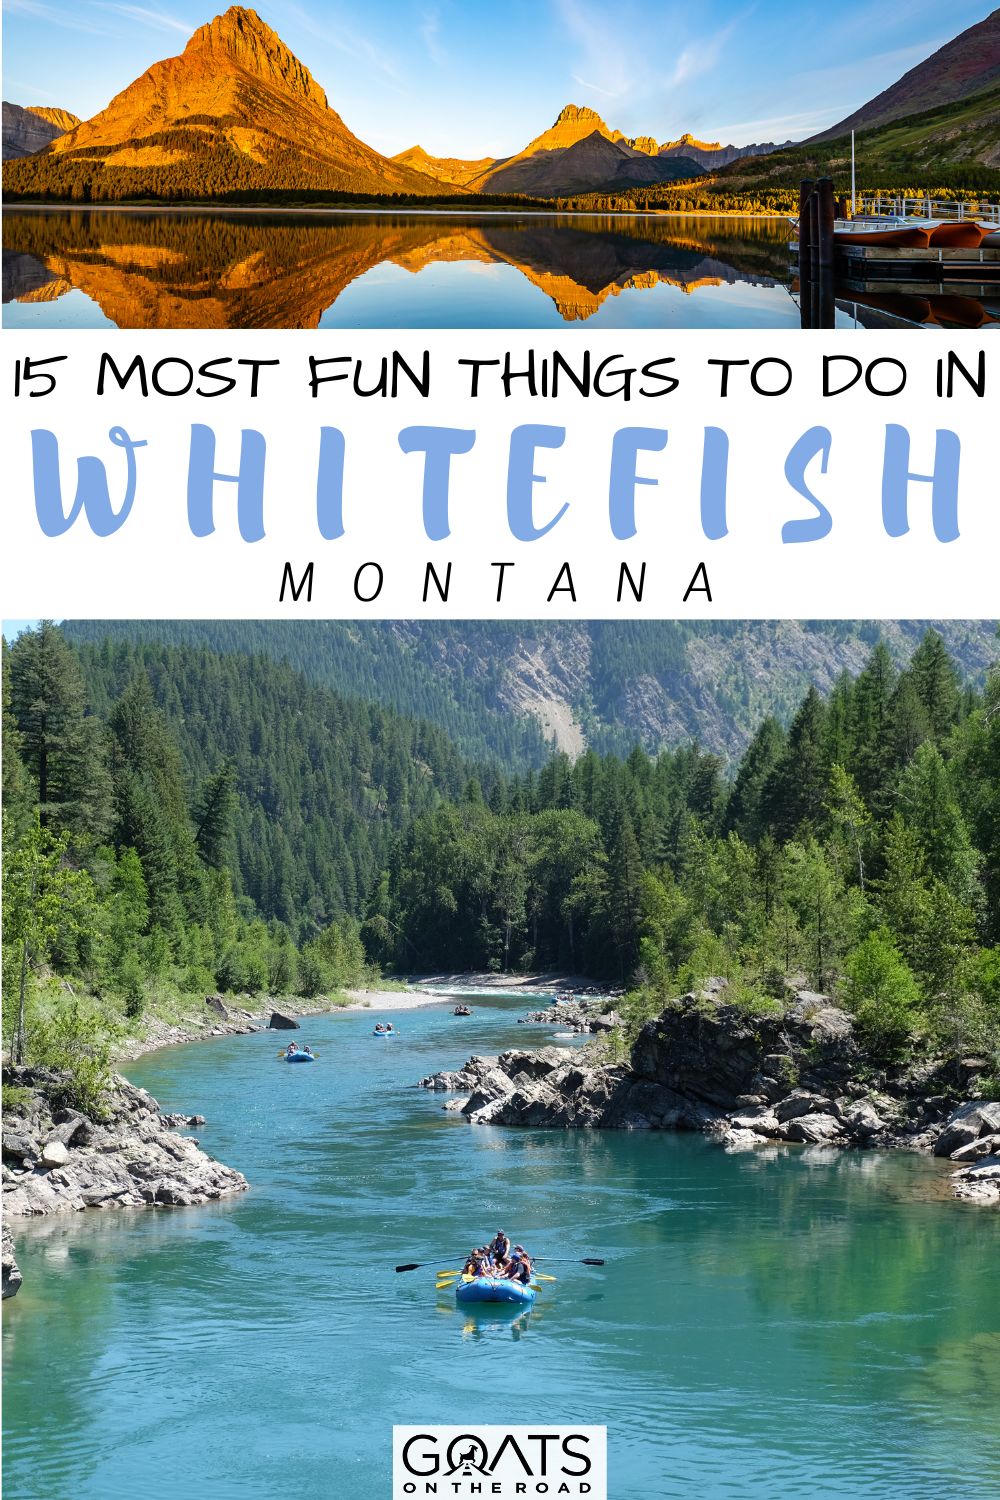 “15 Most Fun Things To Do in Whitefish, Montana